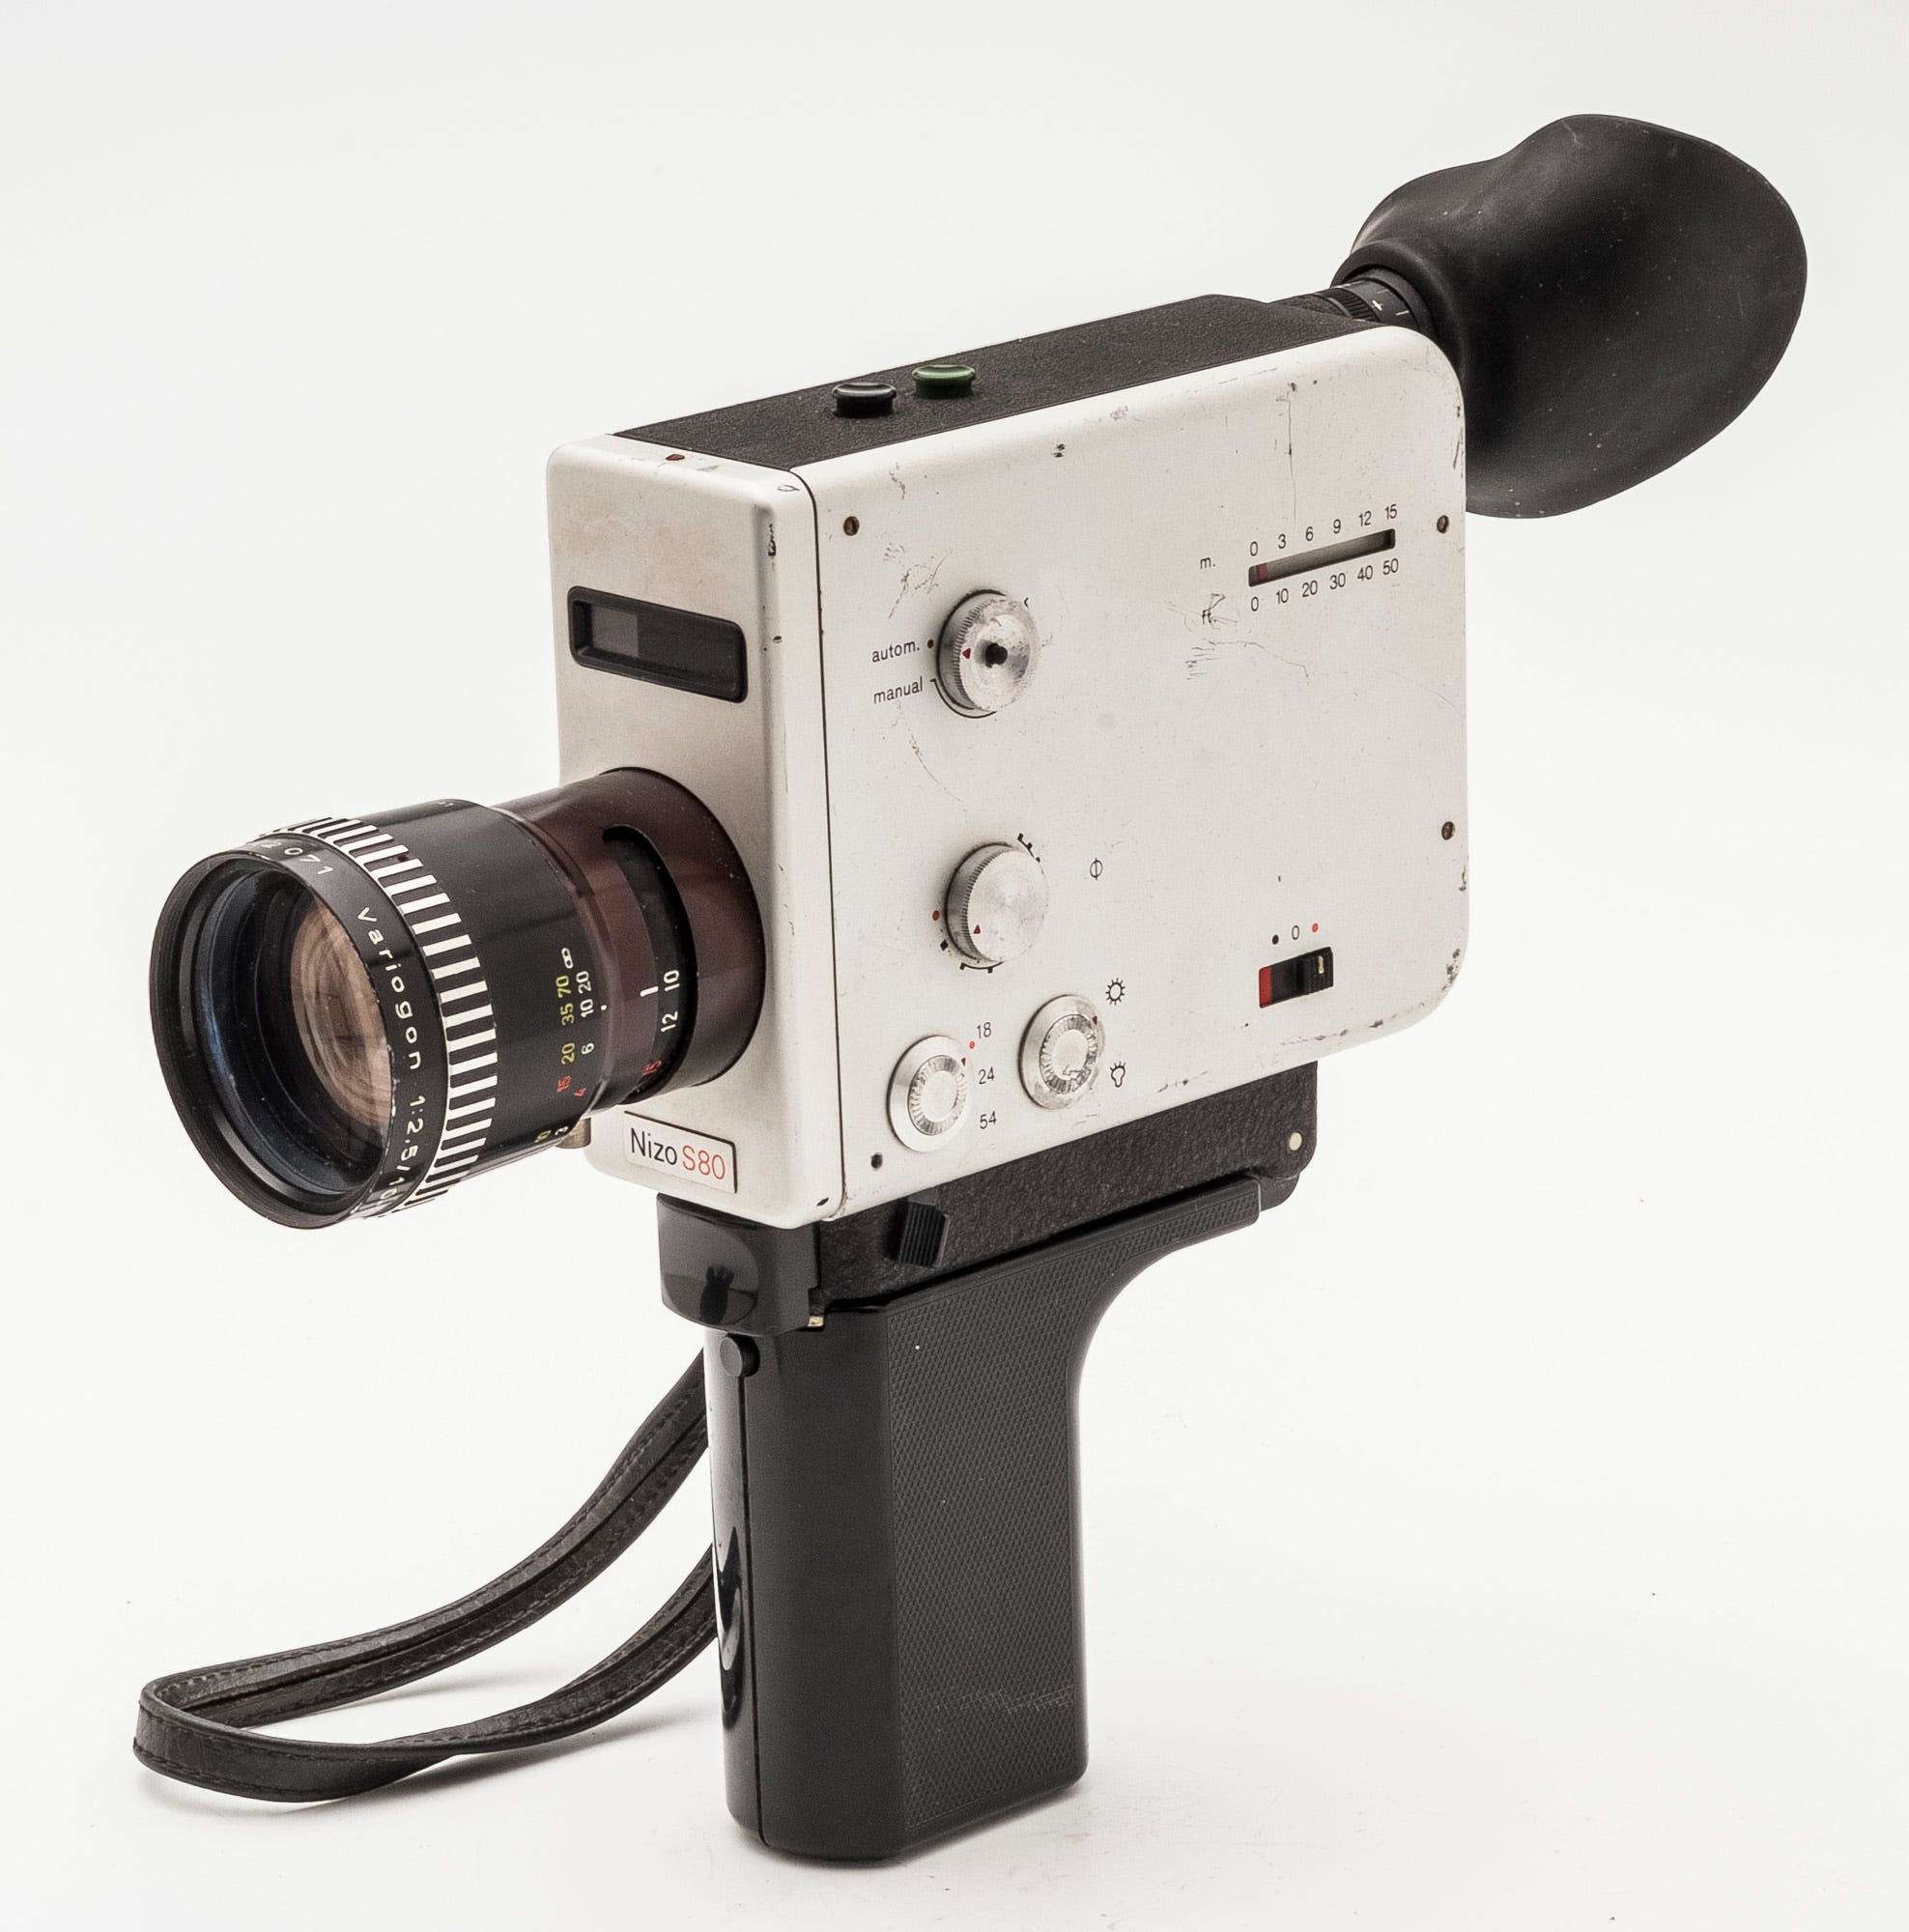 How to shoot Super 8 film in 2020, by Lewis Jelley